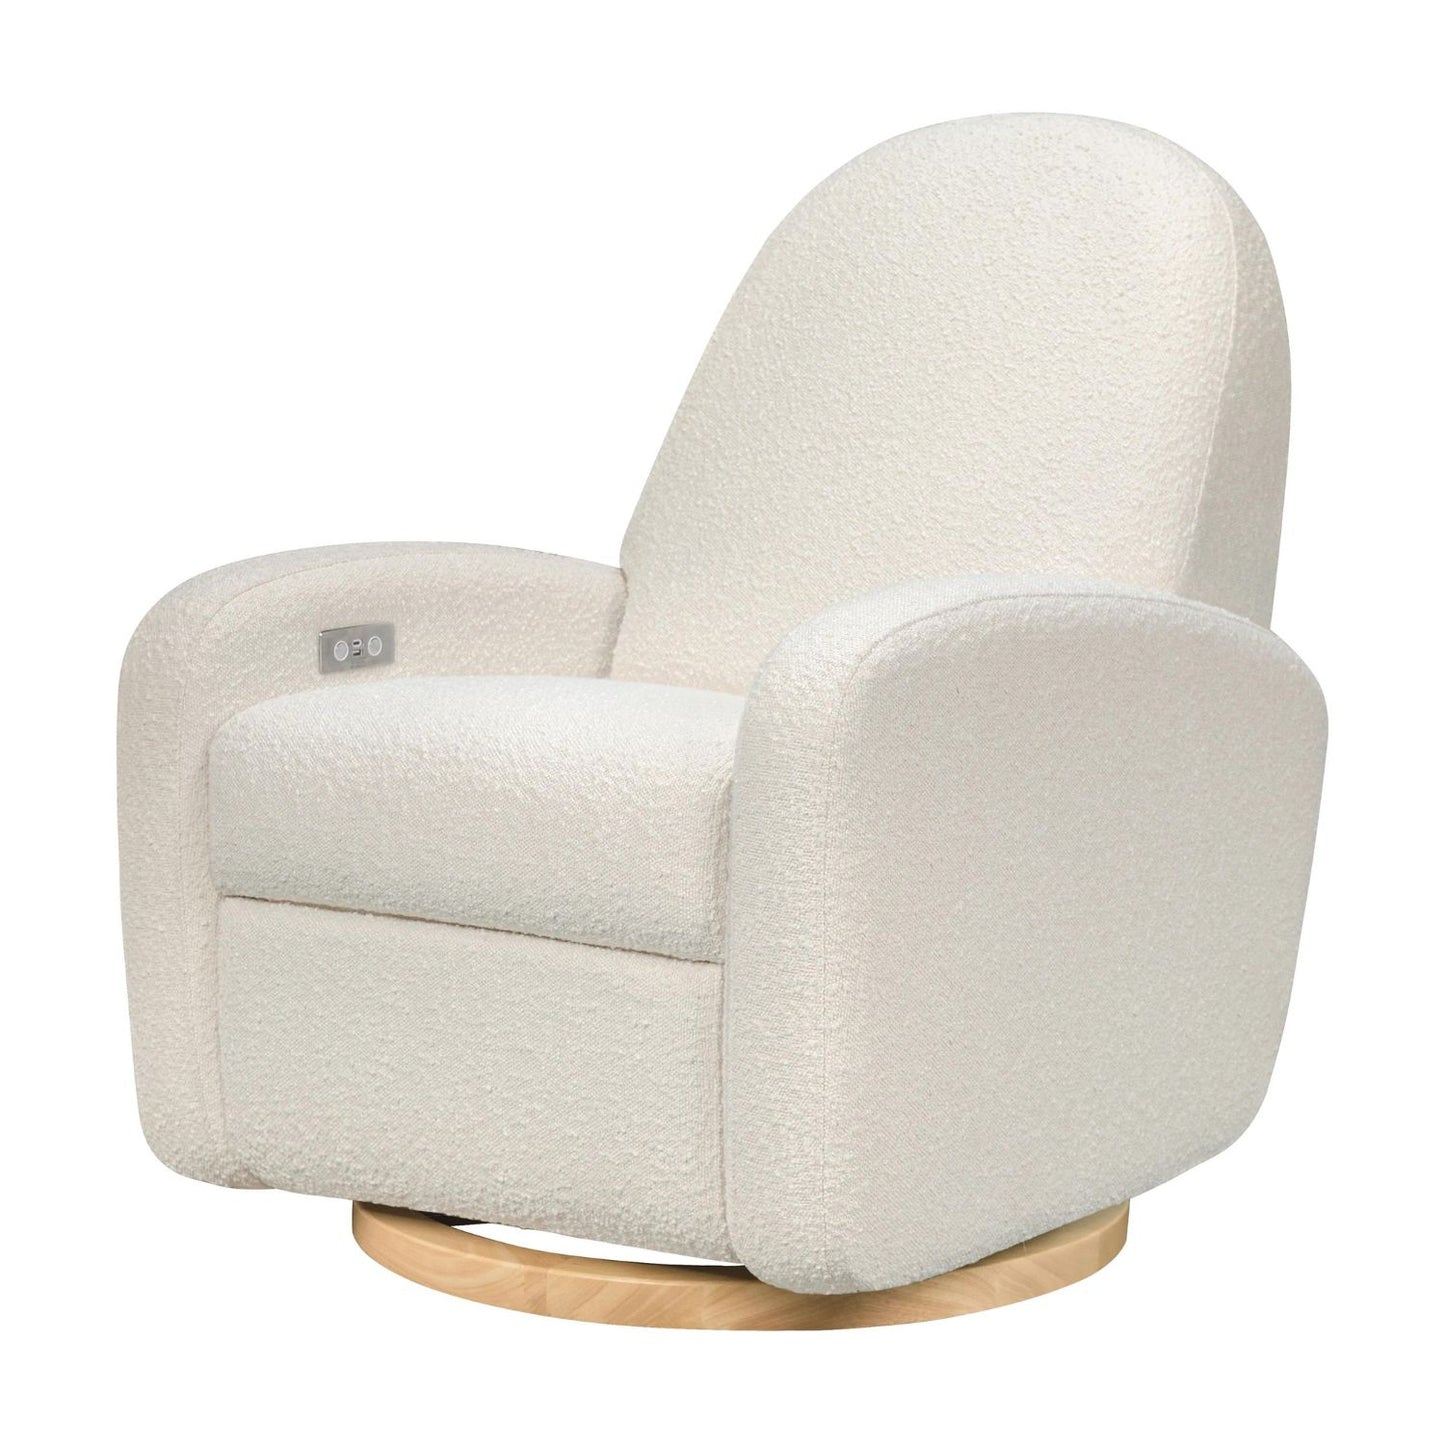 Babyletto Nami Electronic Recliner and Swivel Glider with USB Port - Ivory Boucle with light wood base